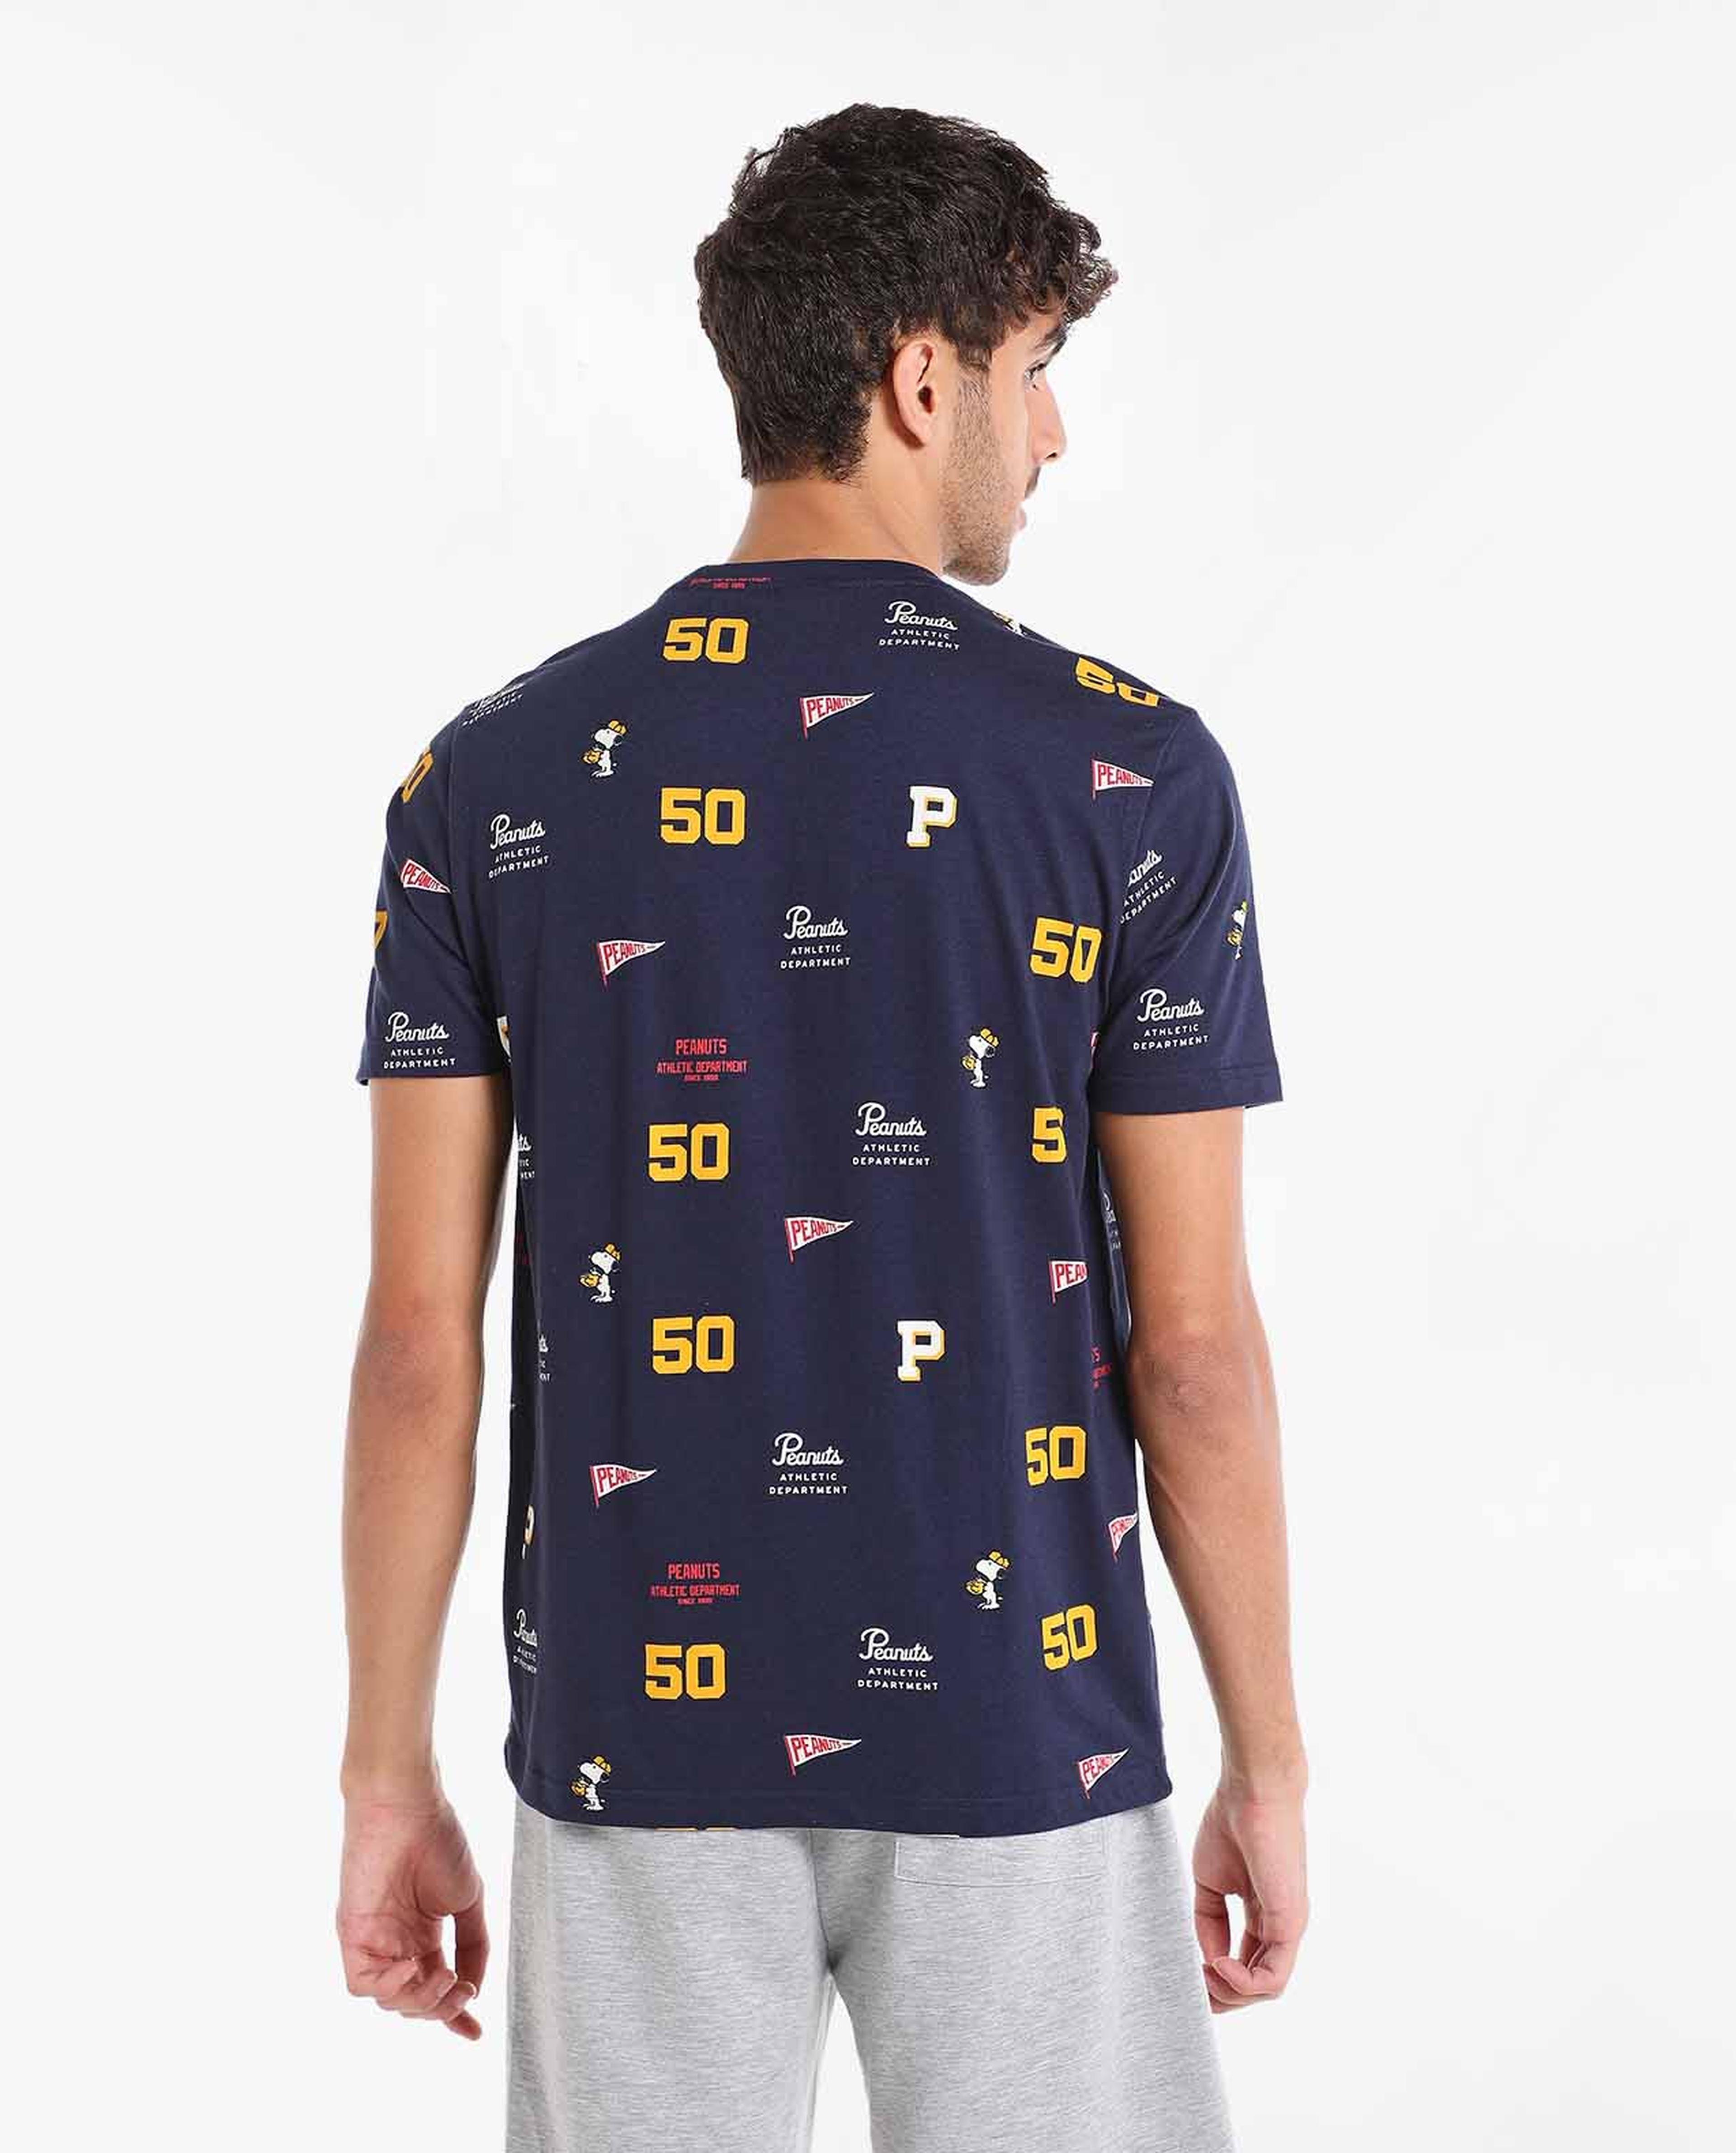 Peanuts Print T-Shirt with Round Neck and Short Sleeves